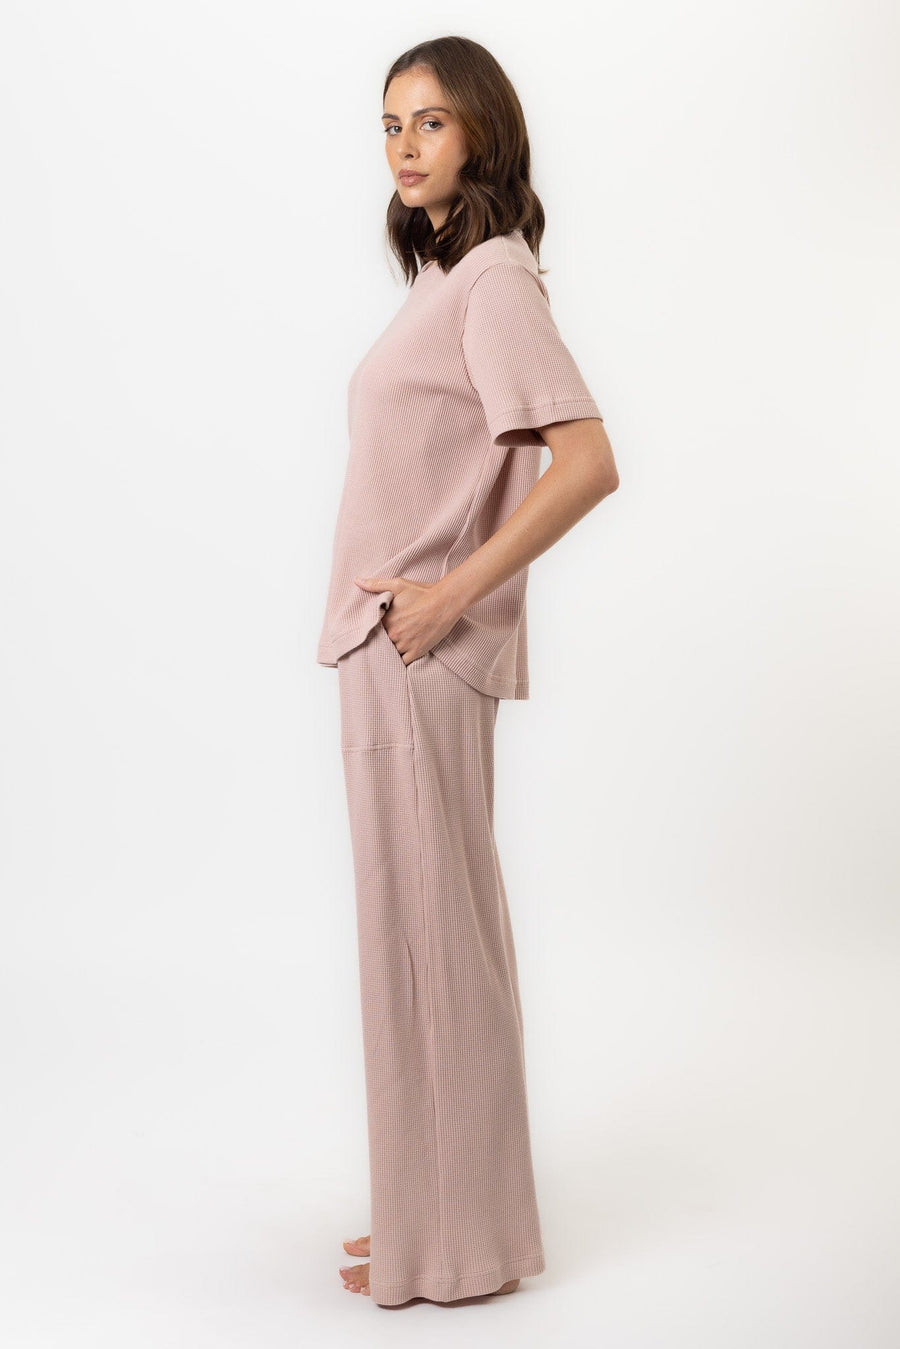 Lush Top | Dusty Pink Lush Top Tops Pajamas Australia Online | Reverie the Label  TOPS Lush Top